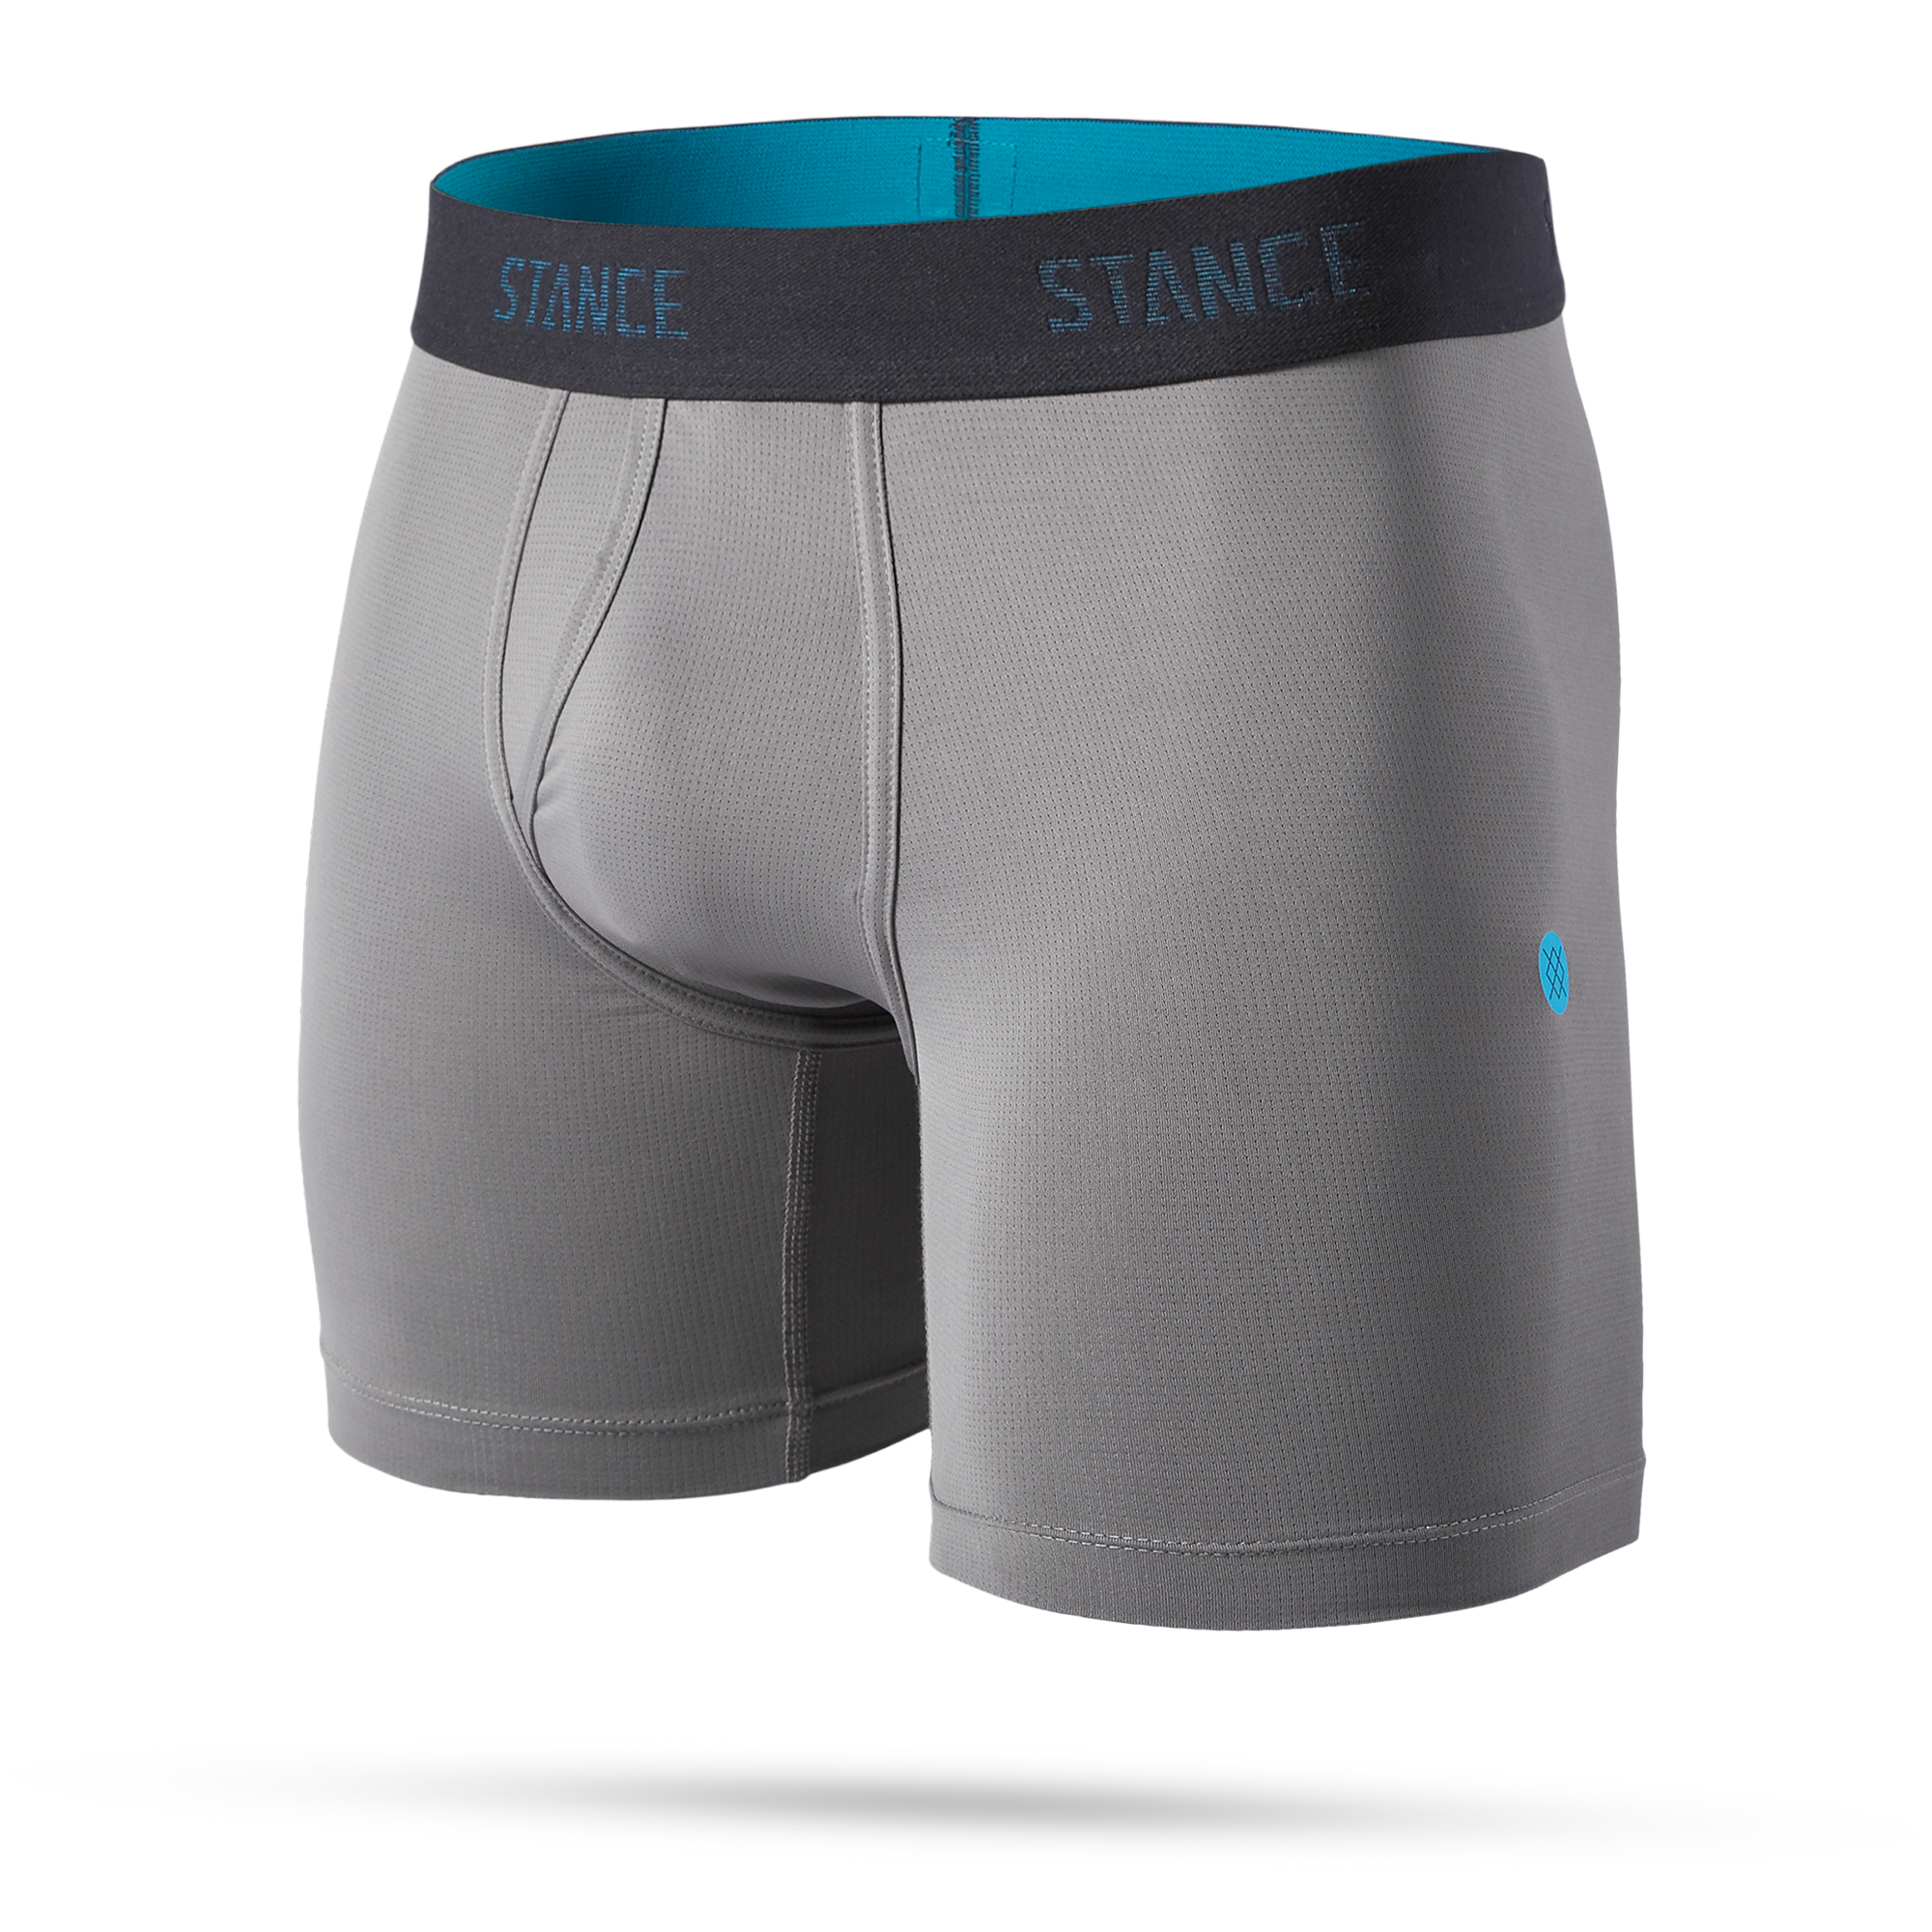 Anza Butter Blend Boxer Brief with Wholester for Men